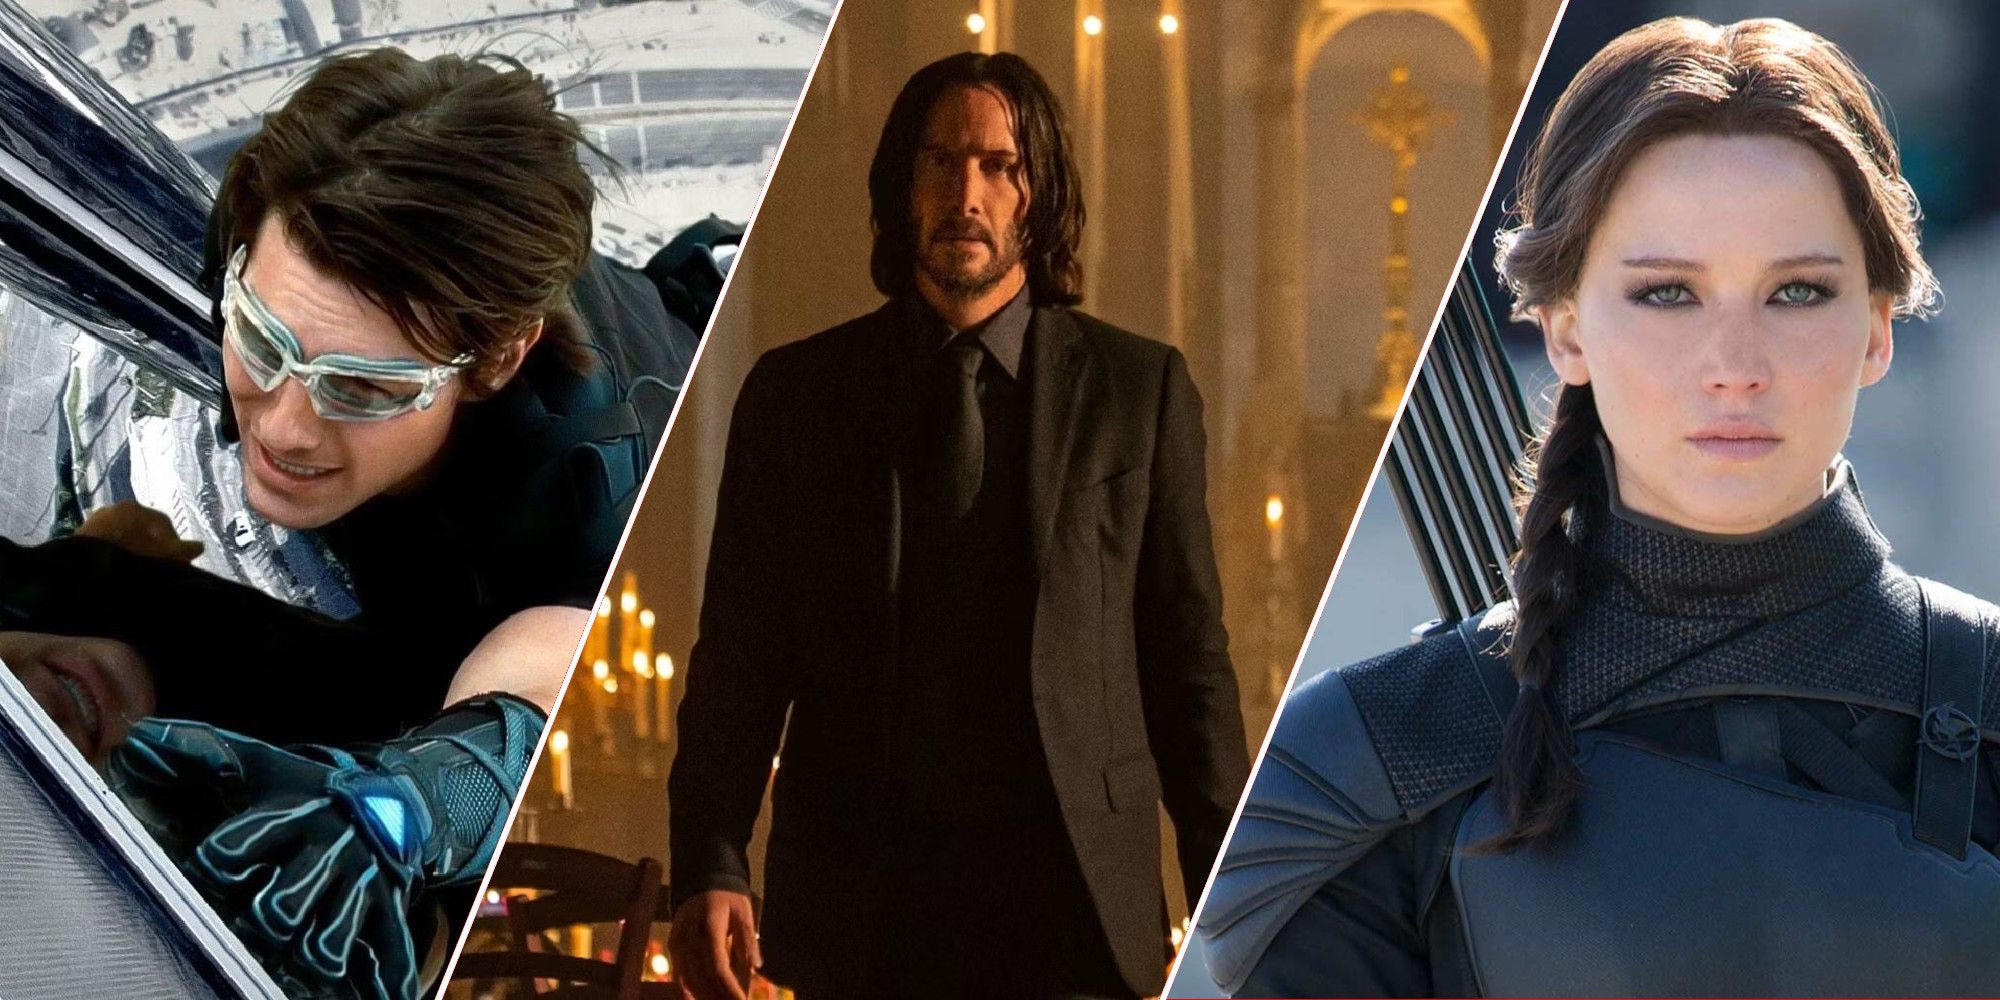 Image for the article 'John Wick: Chapter 4' & Action Franchises that Reached their 4th installment, featuring stills from Mission Impossible: Ghost Protocol, John Wick: Chapter 4, and The Hunger Games: Mockingjay - Part 2